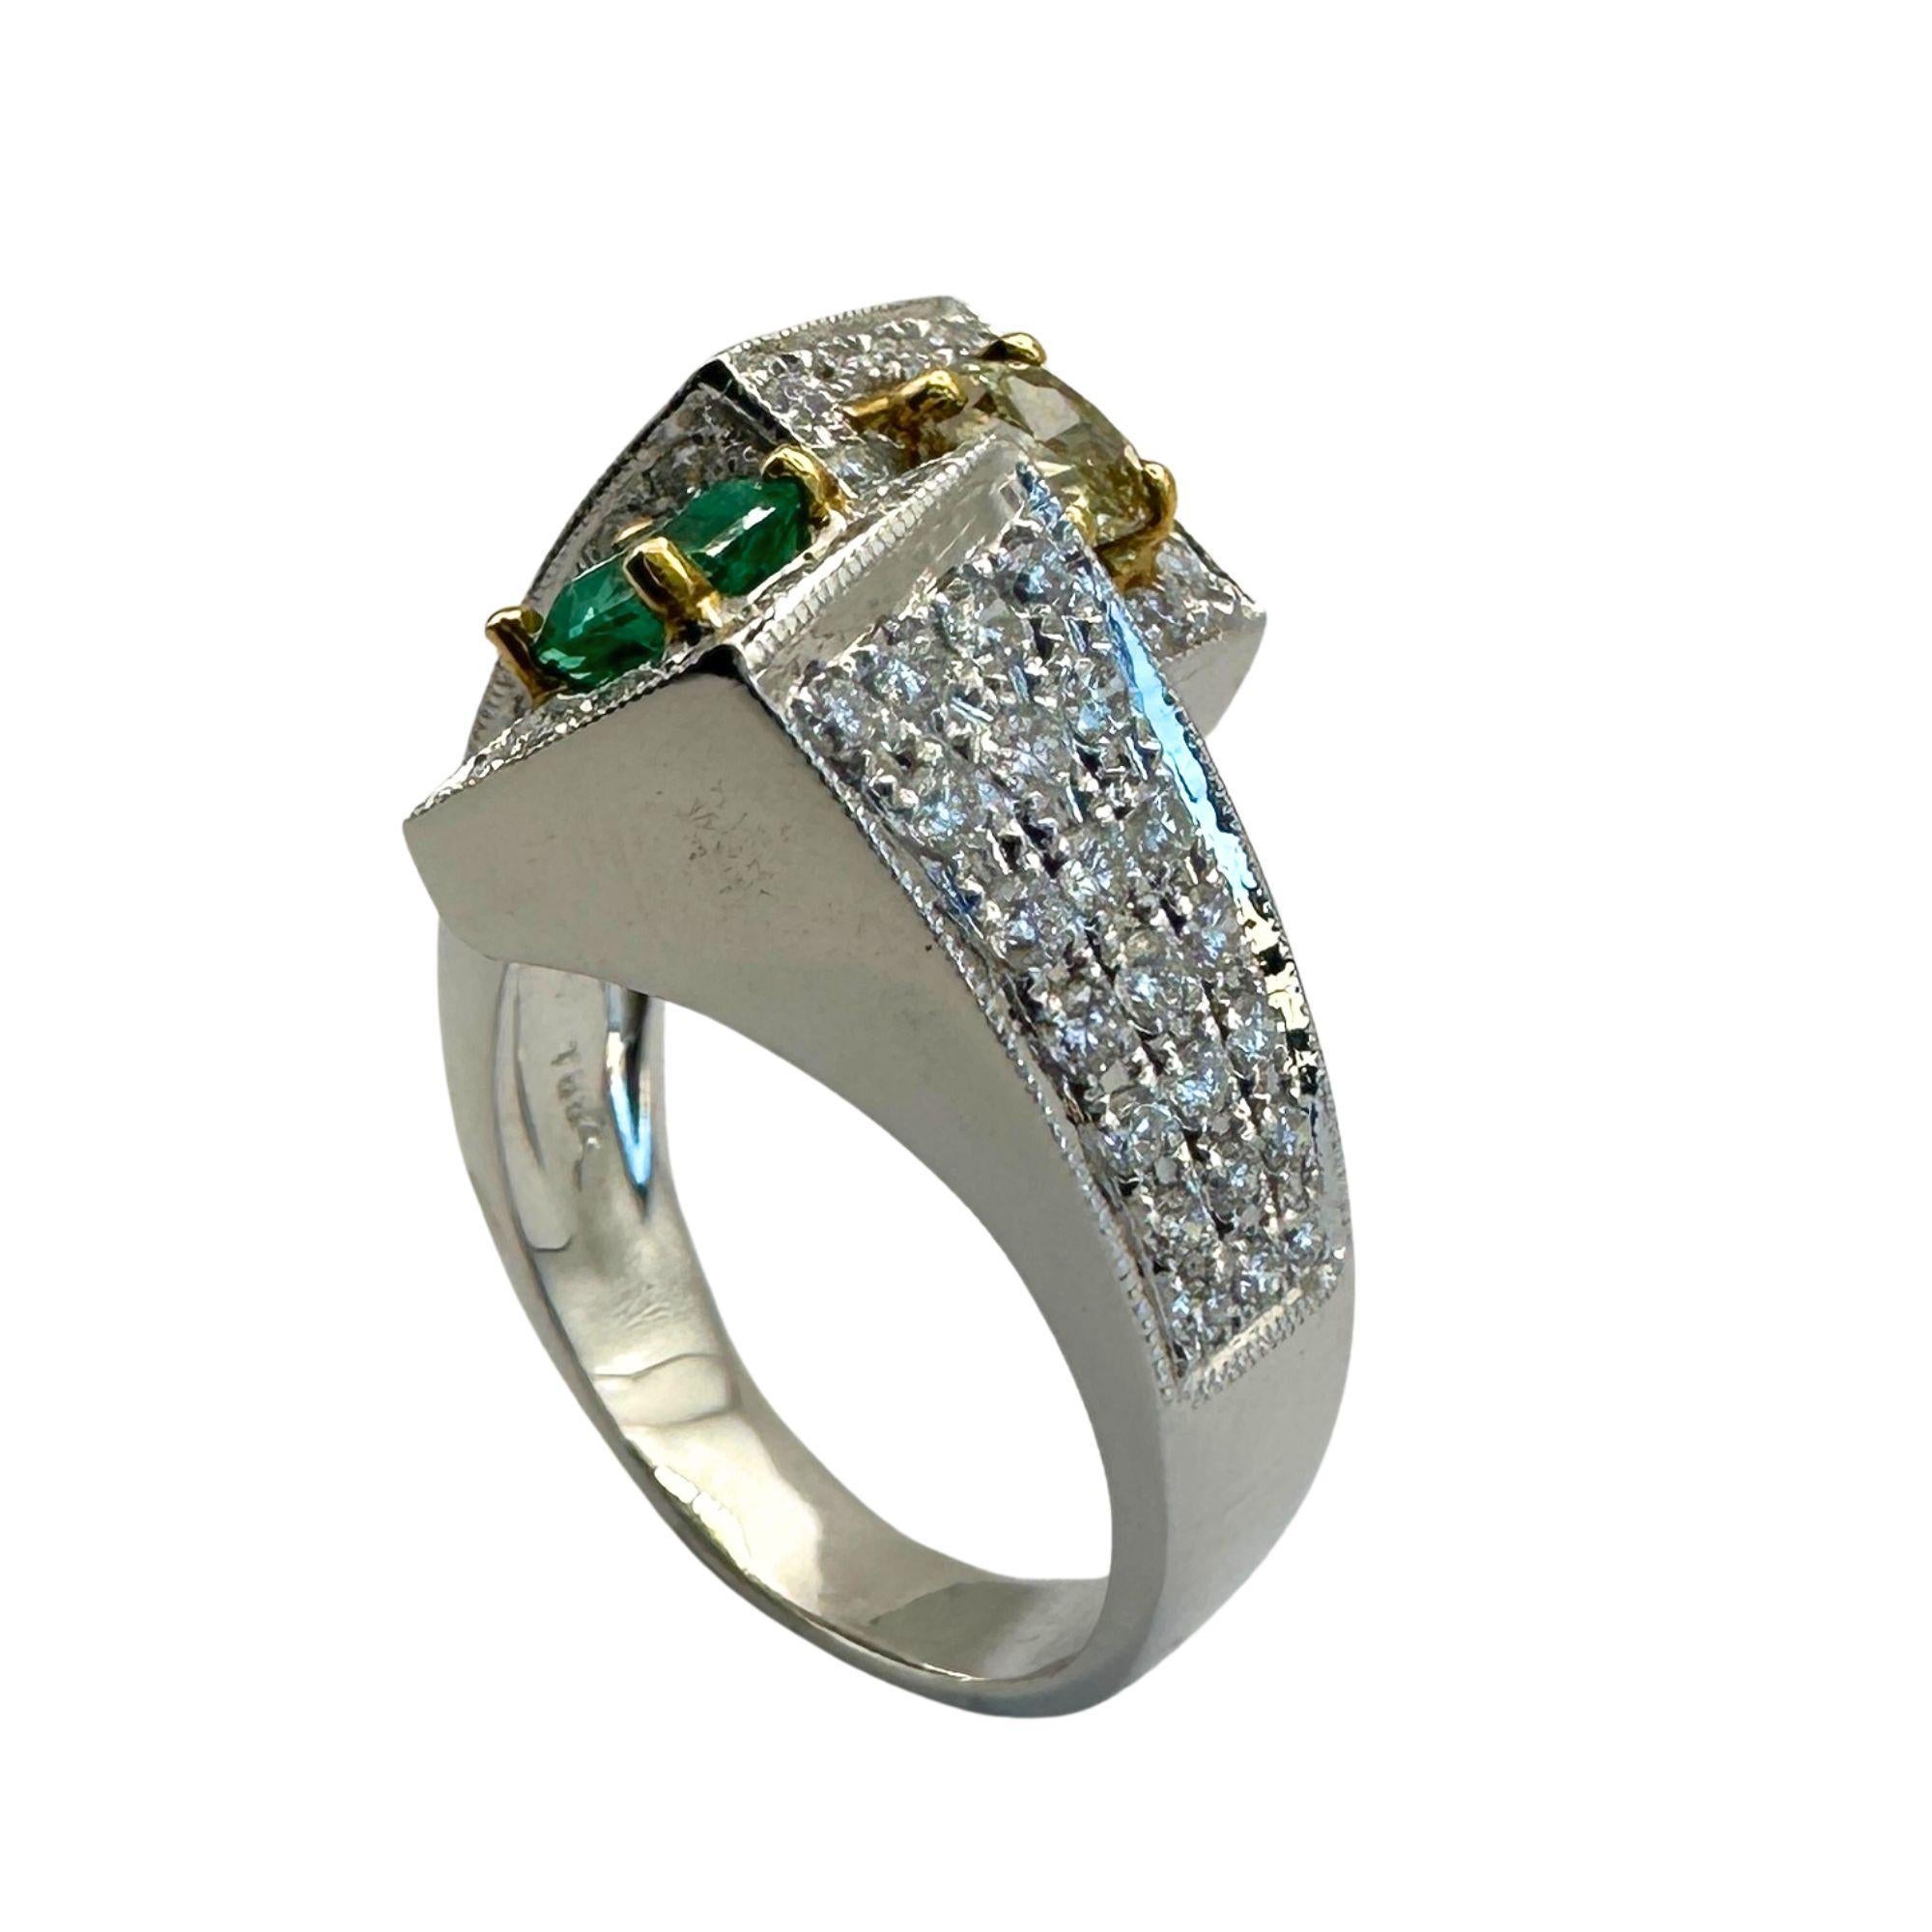 Square Cut 18k White and Yellow Diamond and Emerald Ring